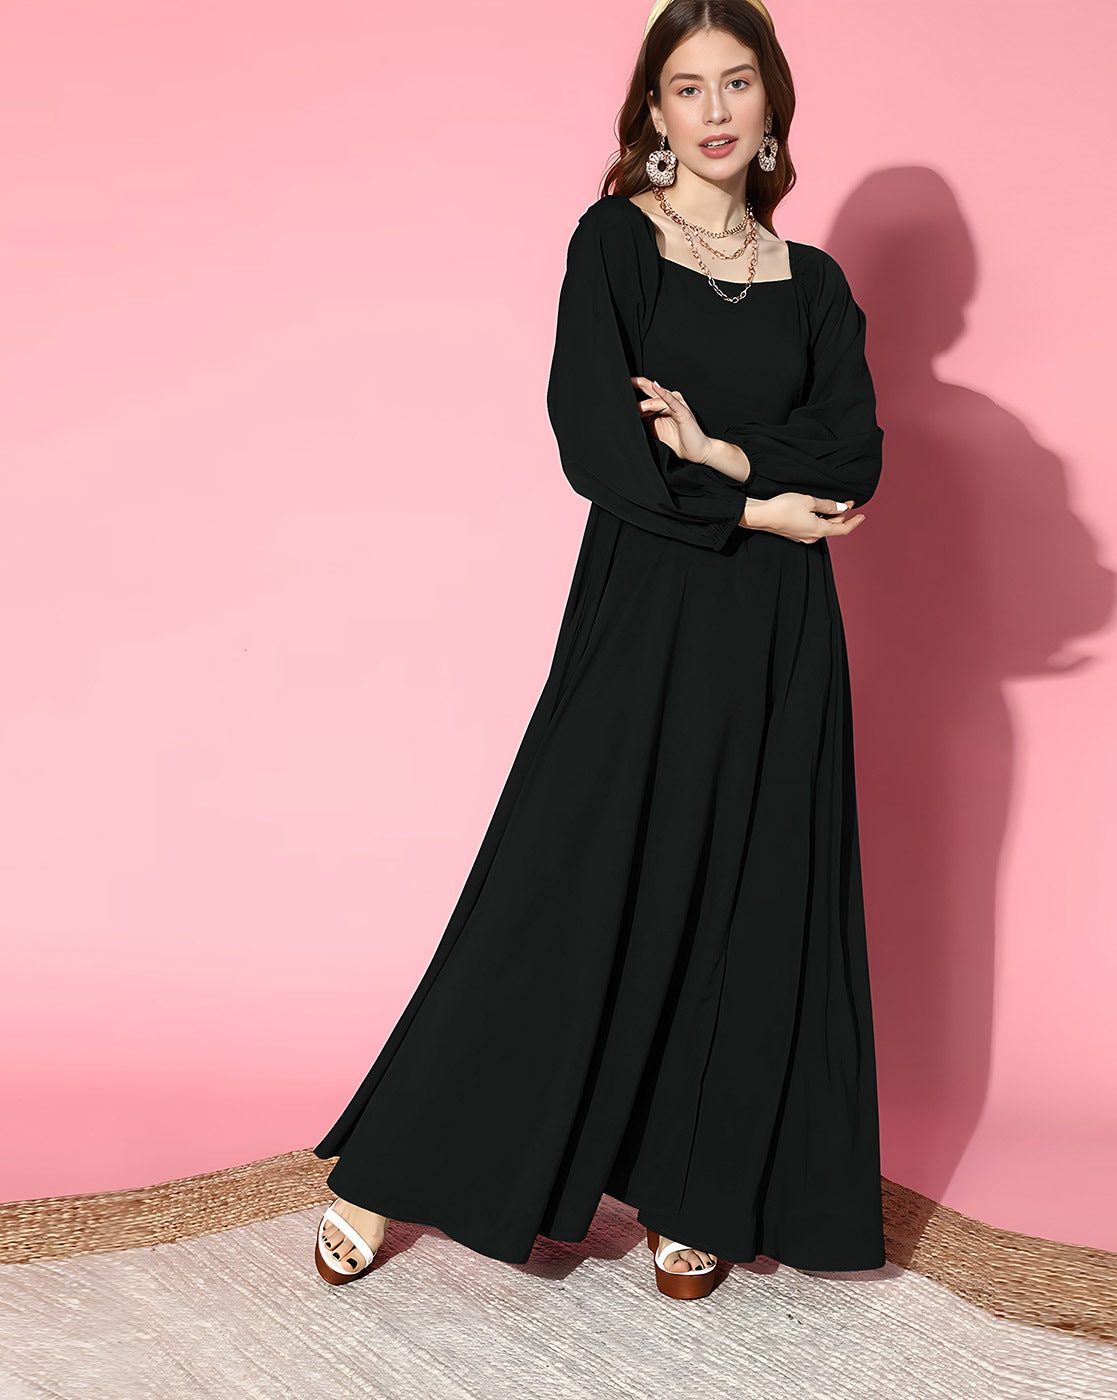 Buy Fashion2wear Women's Georgette Casual Knee Length Fit & Flare Full  Length Gown Dress (Medium, Pink) at Amazon.in